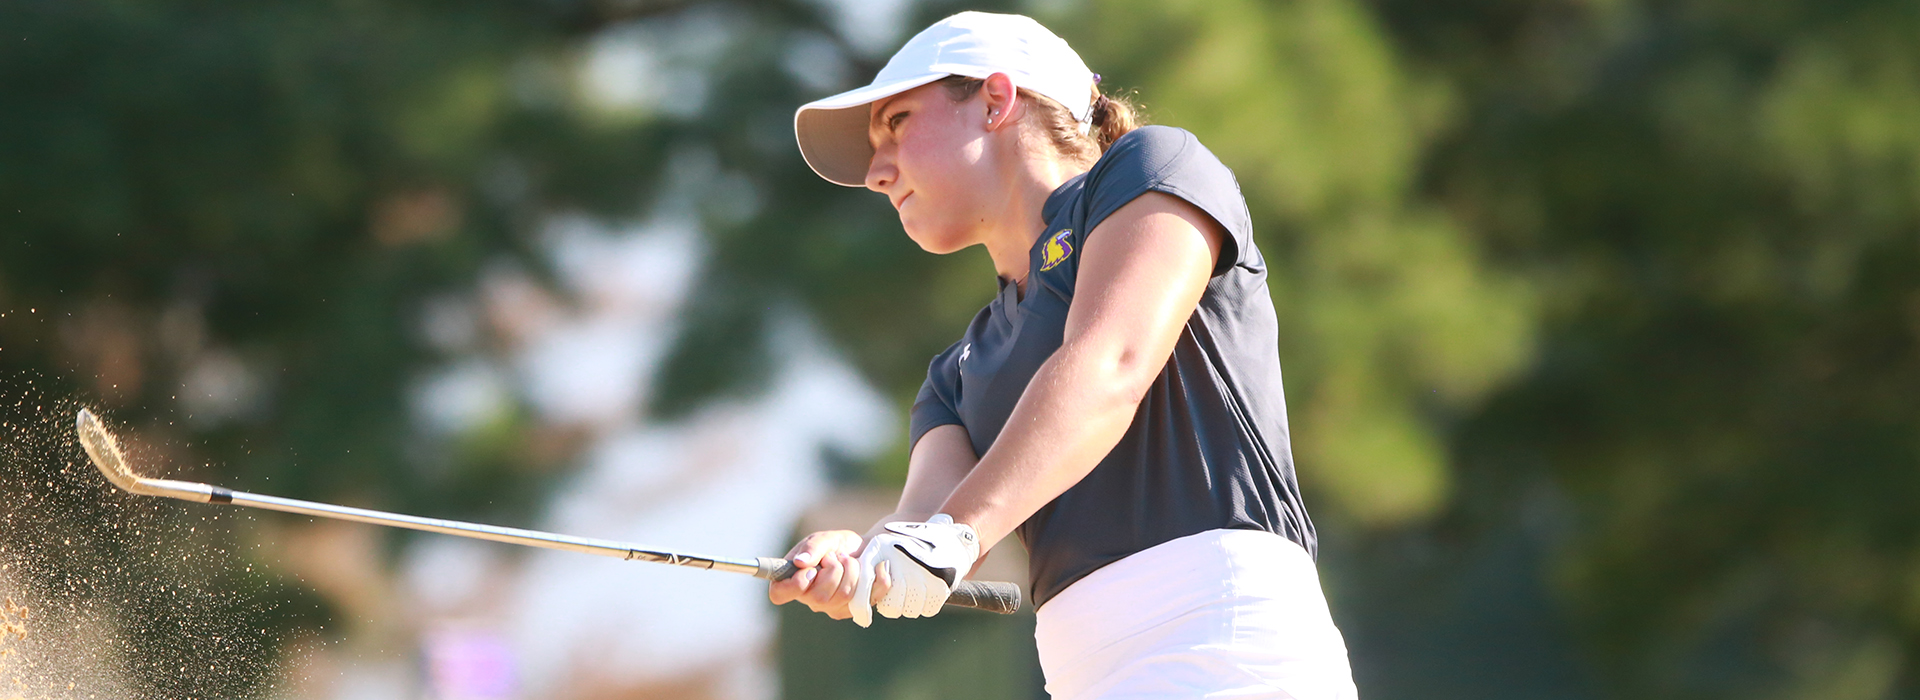 Tech women's golf team maintains sixth place after round two in Gadsden